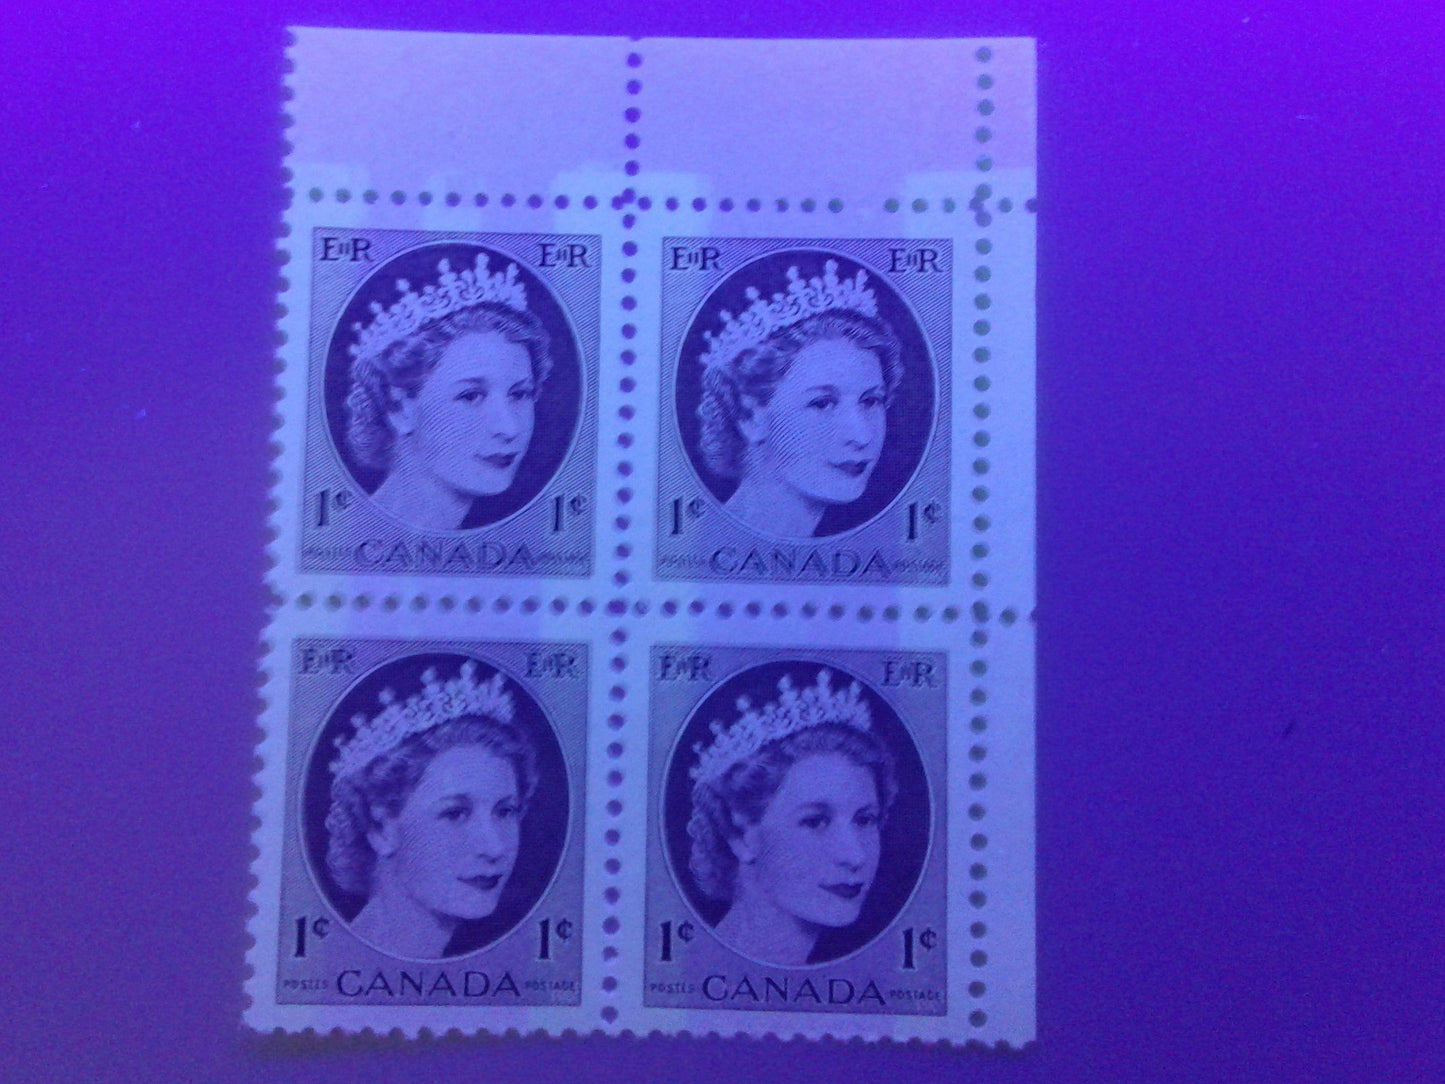 Canada #337p(var) 1c Chocolate Queen Elizabeth II, 1954-1962 Wilding Issue, Upper Right Blank Winnipeg Tagged Blocks of 4, Four Different, Various Perfs., DF Gr Vertically Ribbed Paper, Streaky Semi Gloss Gum, Bluish White Tagging With Extra Streak, VFNH Brixton Chrome 